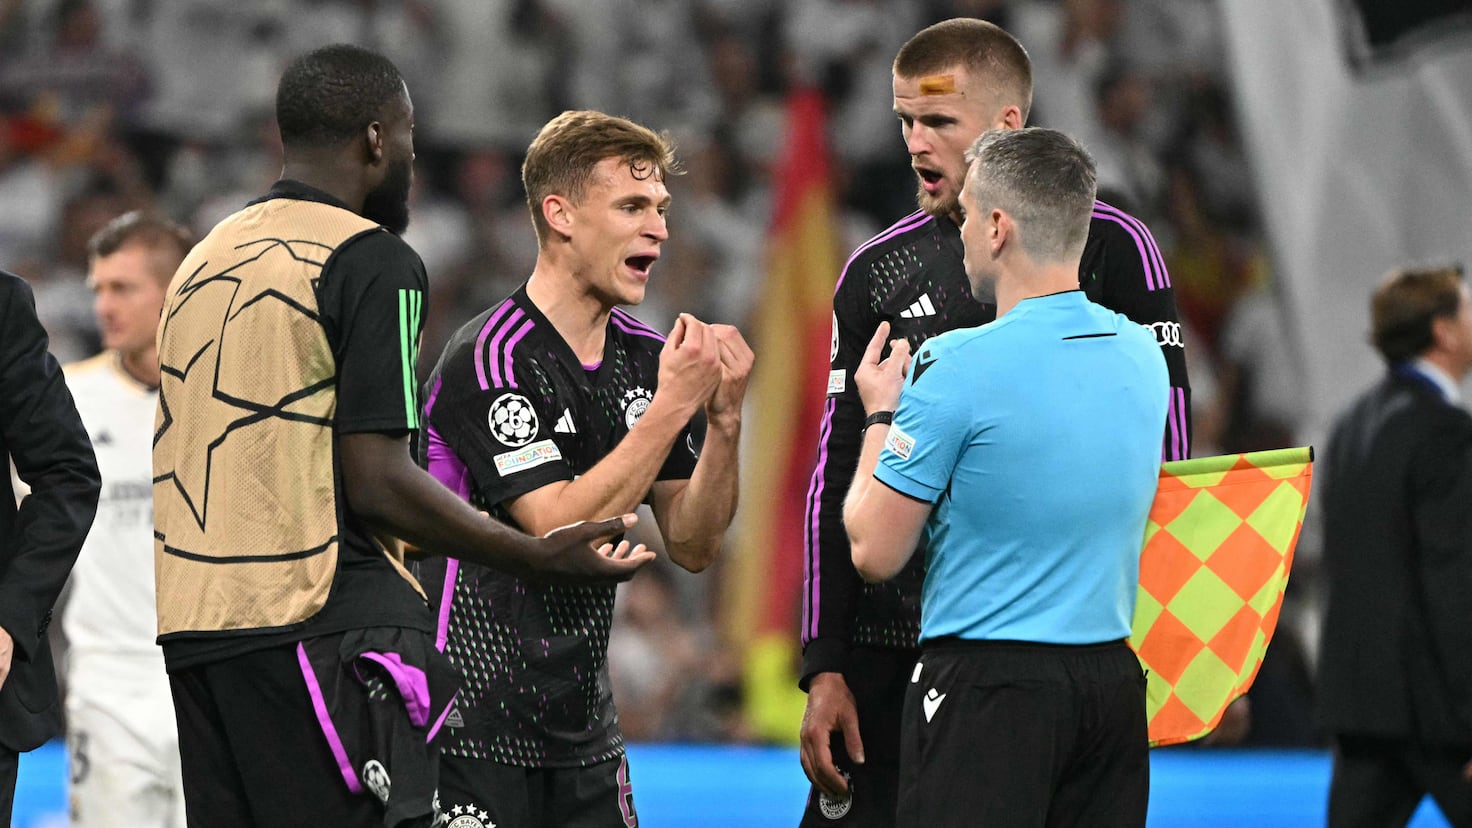 Toni Kroos Criticizes Referee Decision in Controversial Bayern Match